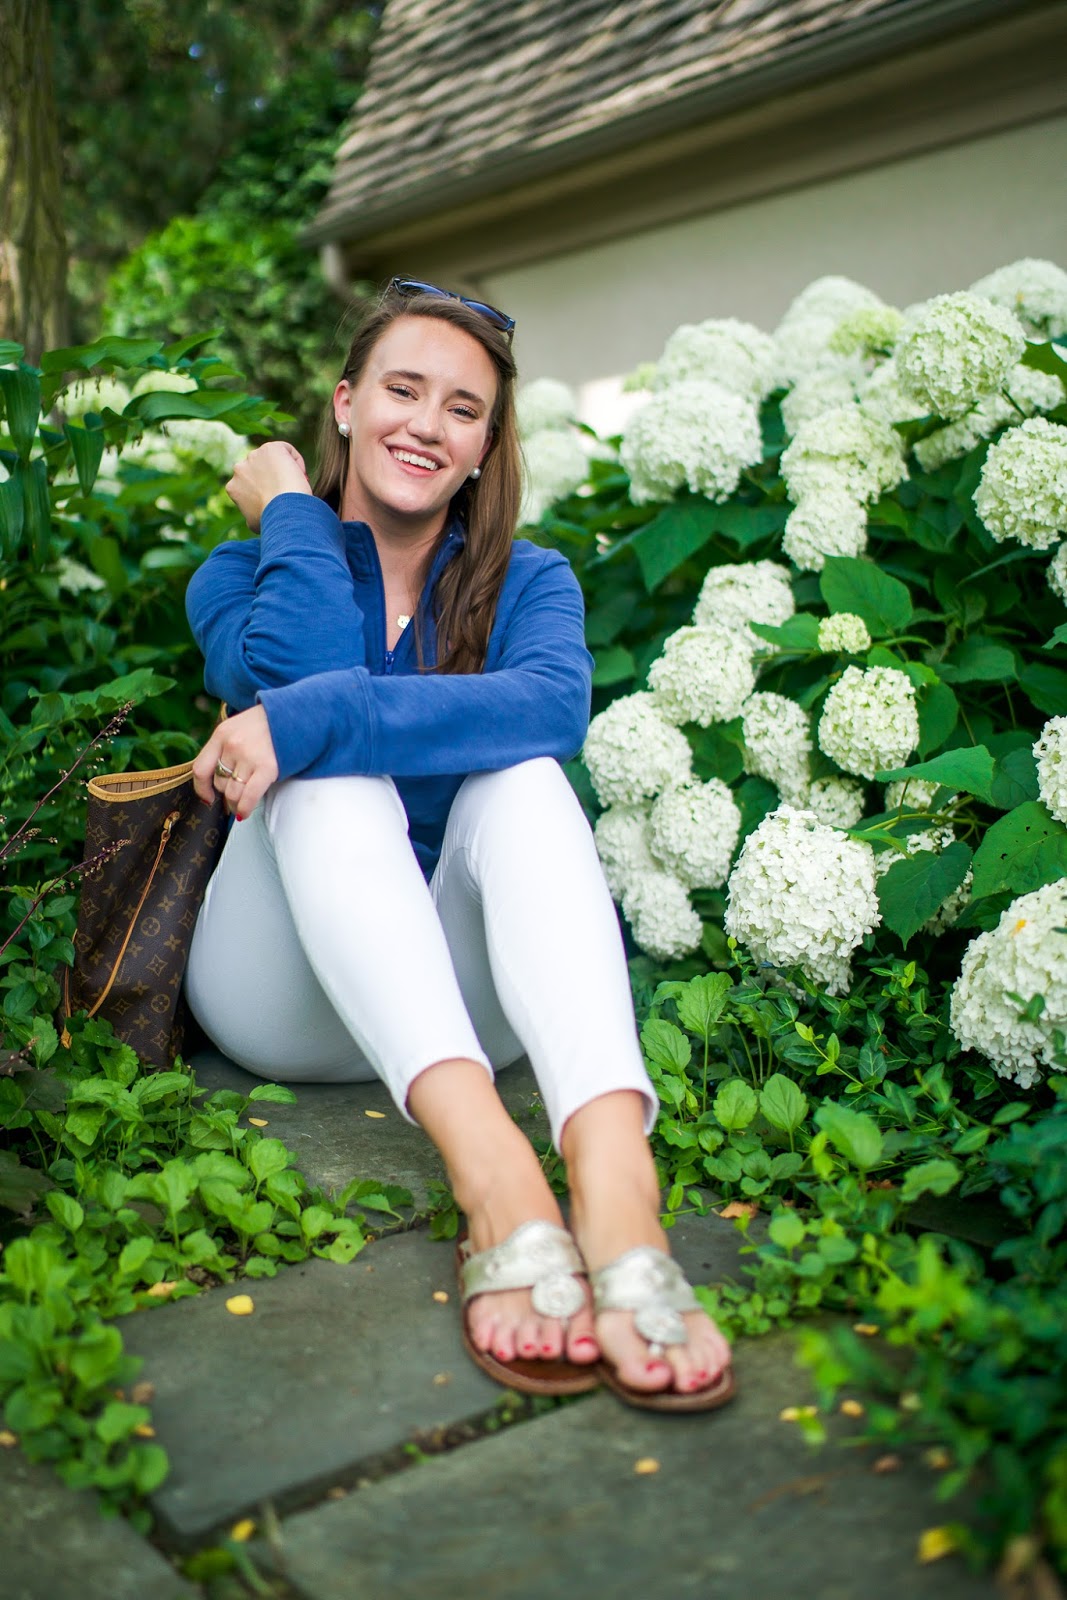 My Casual Travel Look, Connecticut Fashion and Lifestyle Blog